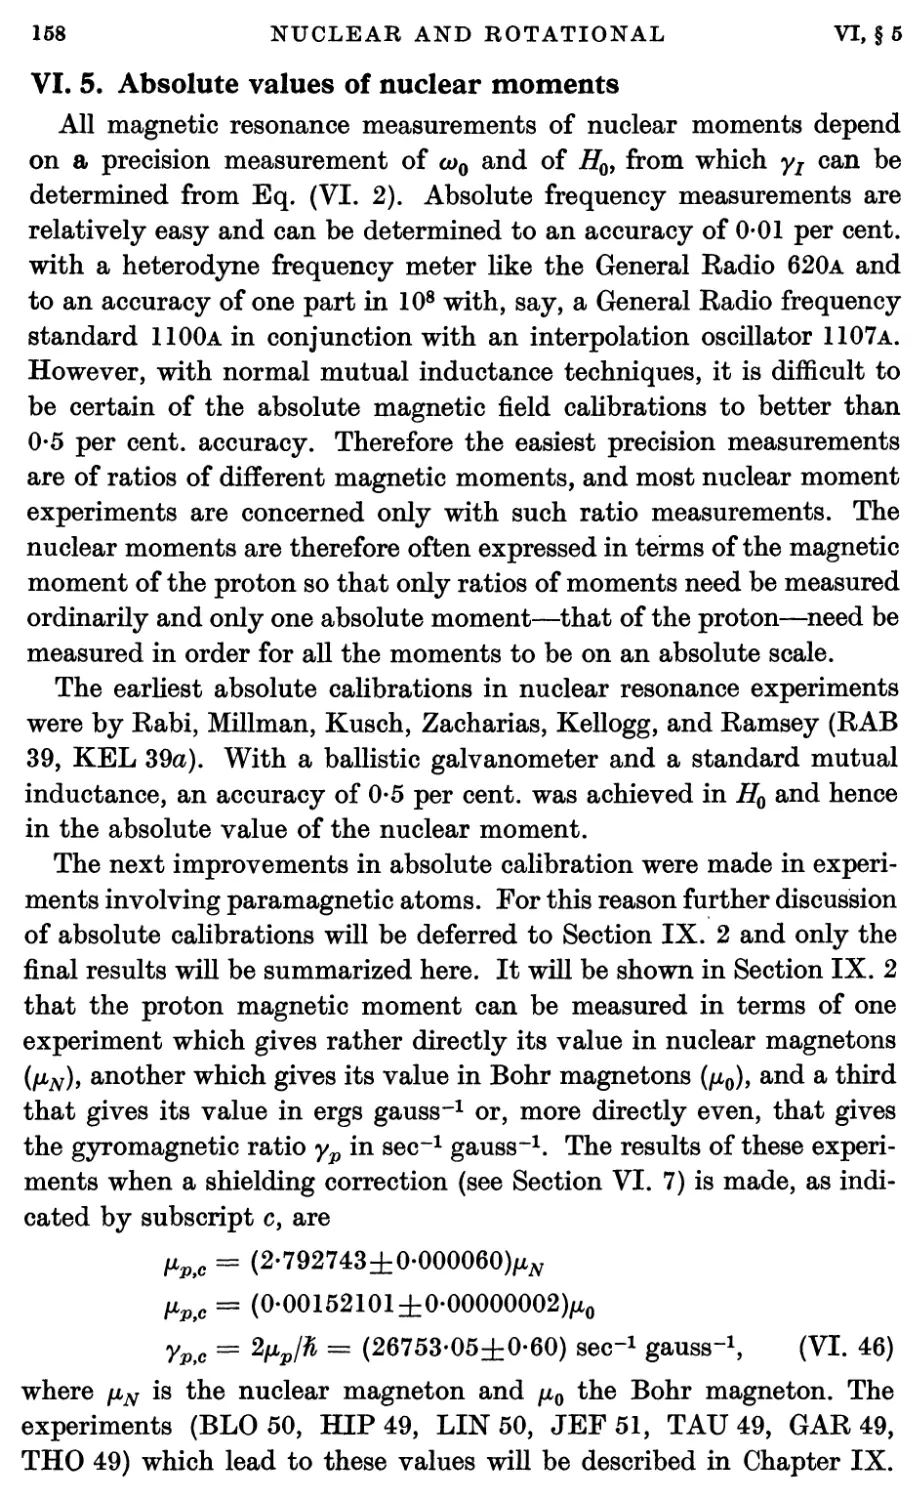 VI.5. Absolute Values of Nuclear Moments